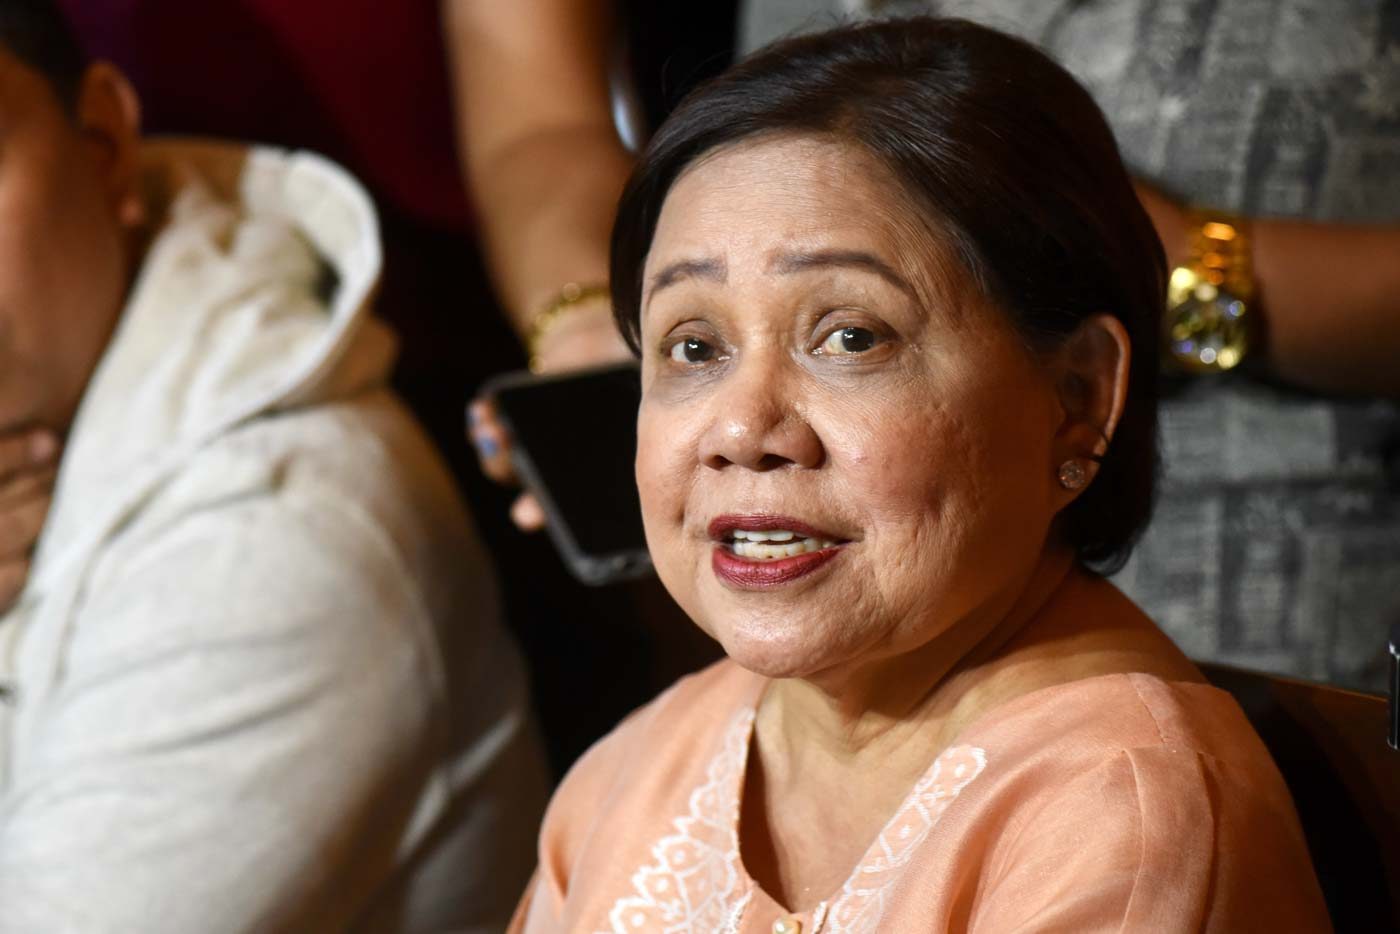 Villar on higher galunggong prices: ‘Why eat it if too expensive?’